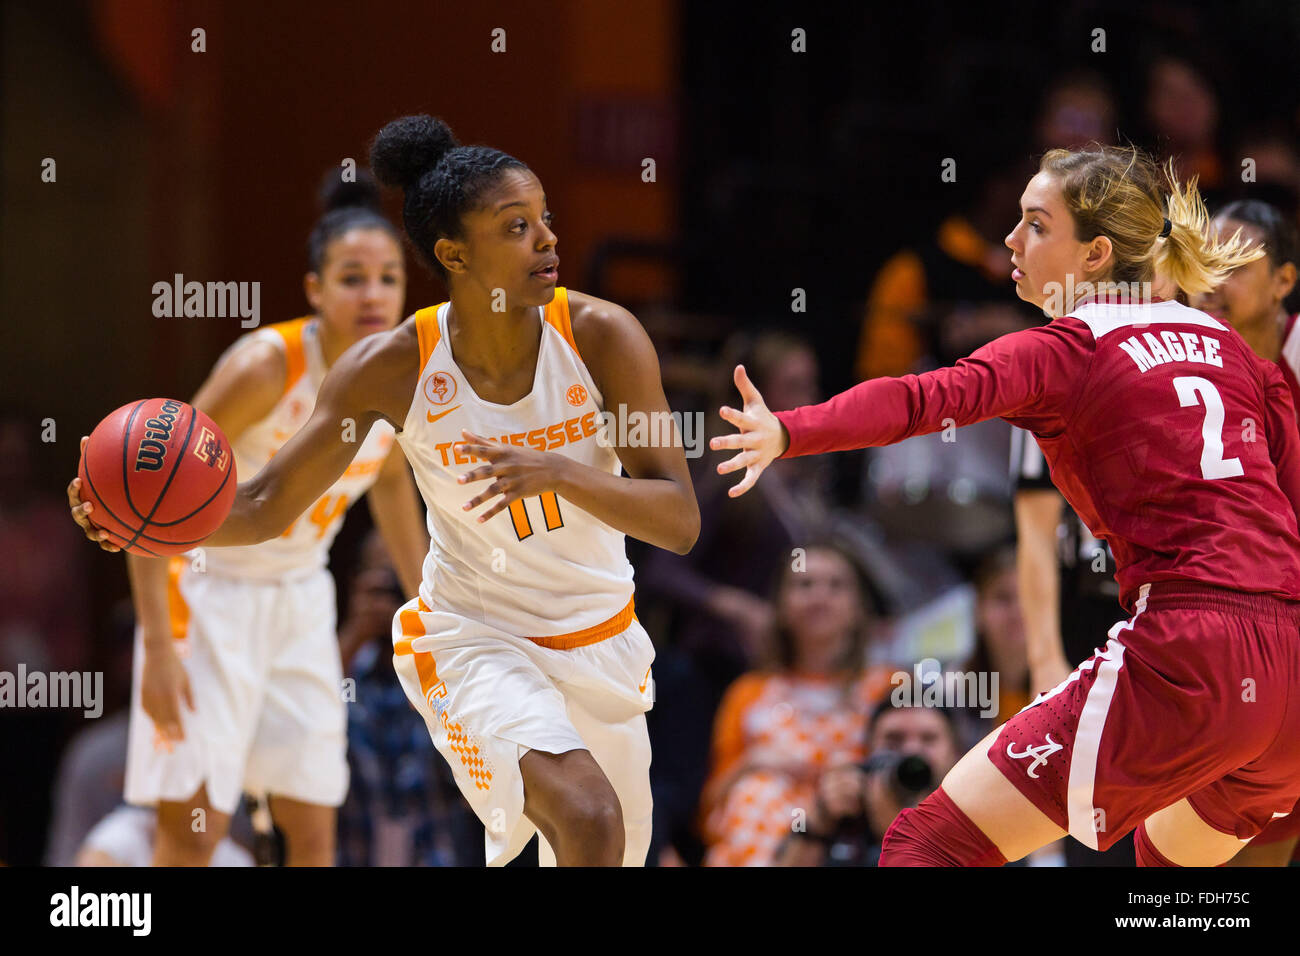 January 31, 2016: Diamond DeShields #11 of the Tennessee Lady Volunteers passes the ball around Trista Magee #2 of the Alabama Crimson Tide during the NCAA basketball game between the University of Tennessee Lady Volunteers and the University of Alabama Crimson Tide at Thompson Boling Arena in Knoxville TN Tim Gangloff/CSM Stock Photo